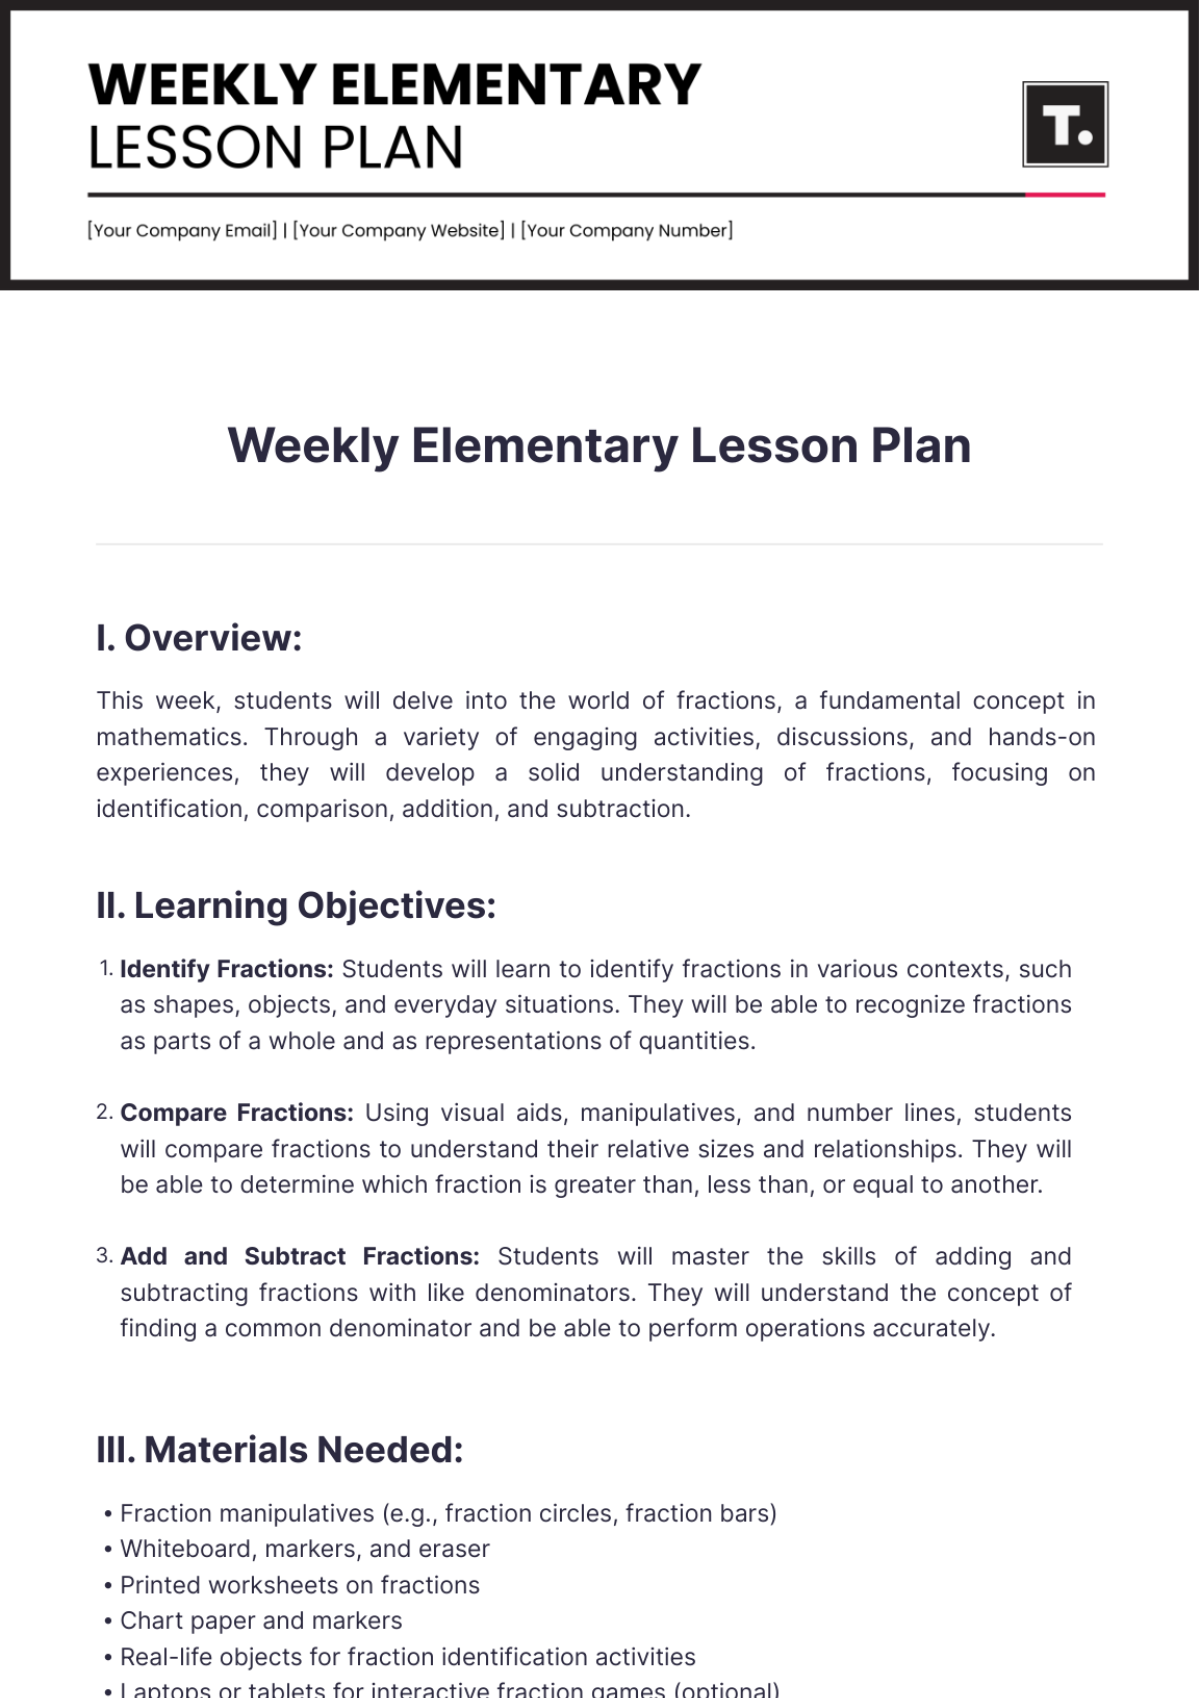 Free Weekly Elementary Lesson Plan Template